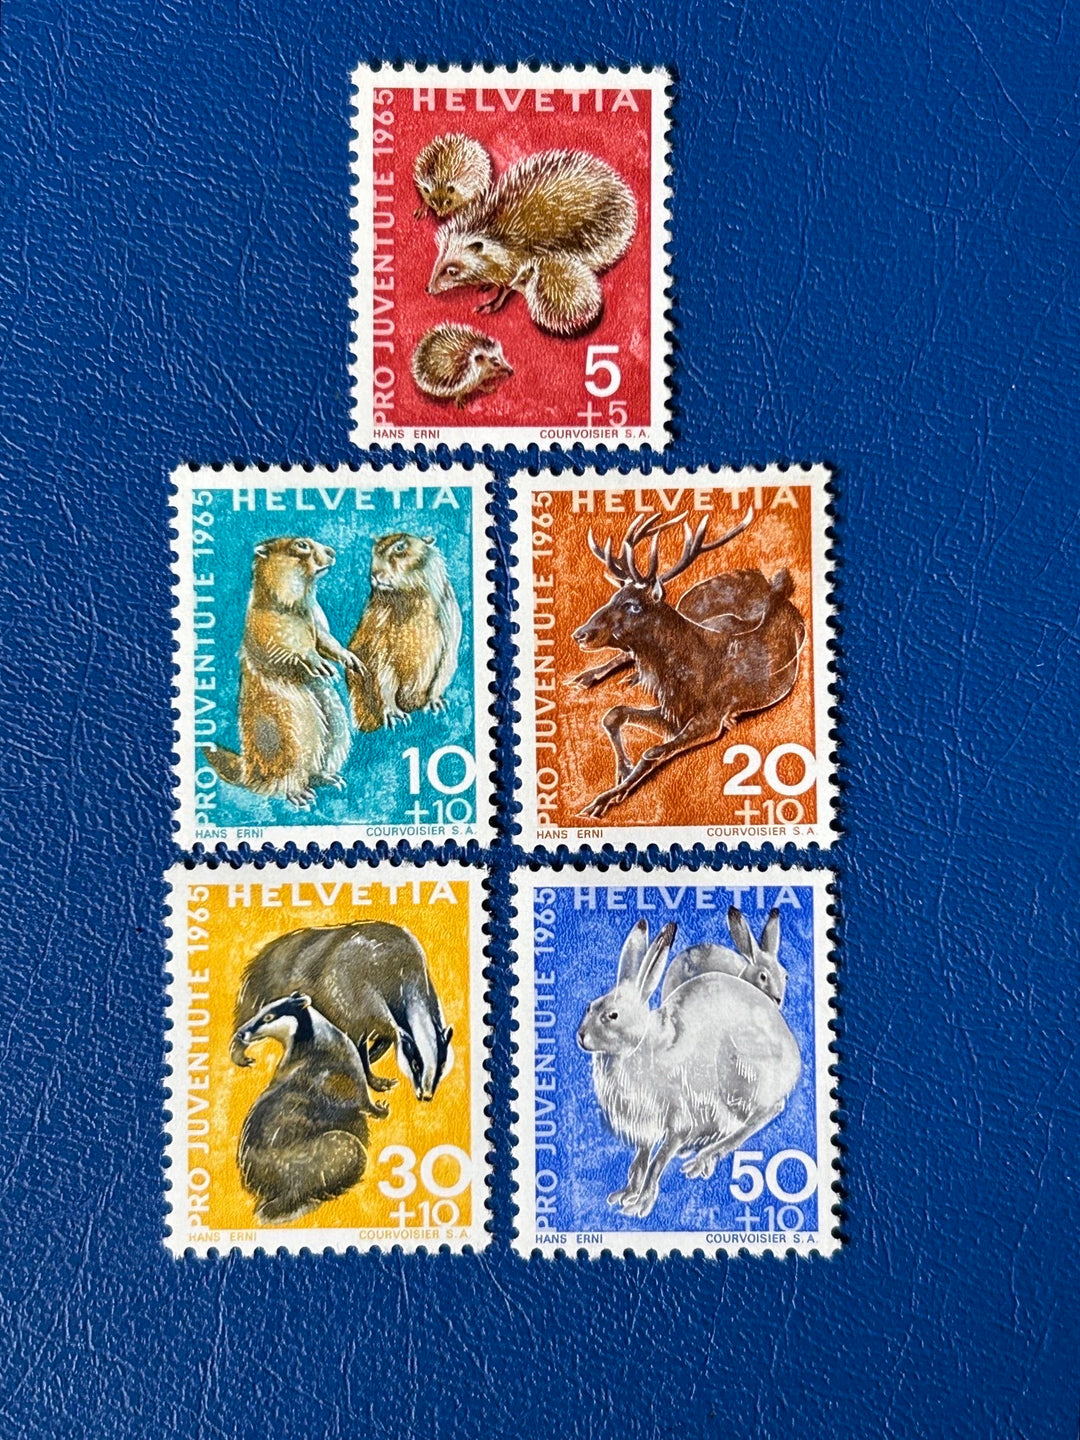 Switzerland - Original Vintage Postage Stamps- 1965 - Fauna - for the collector, artist or crafter